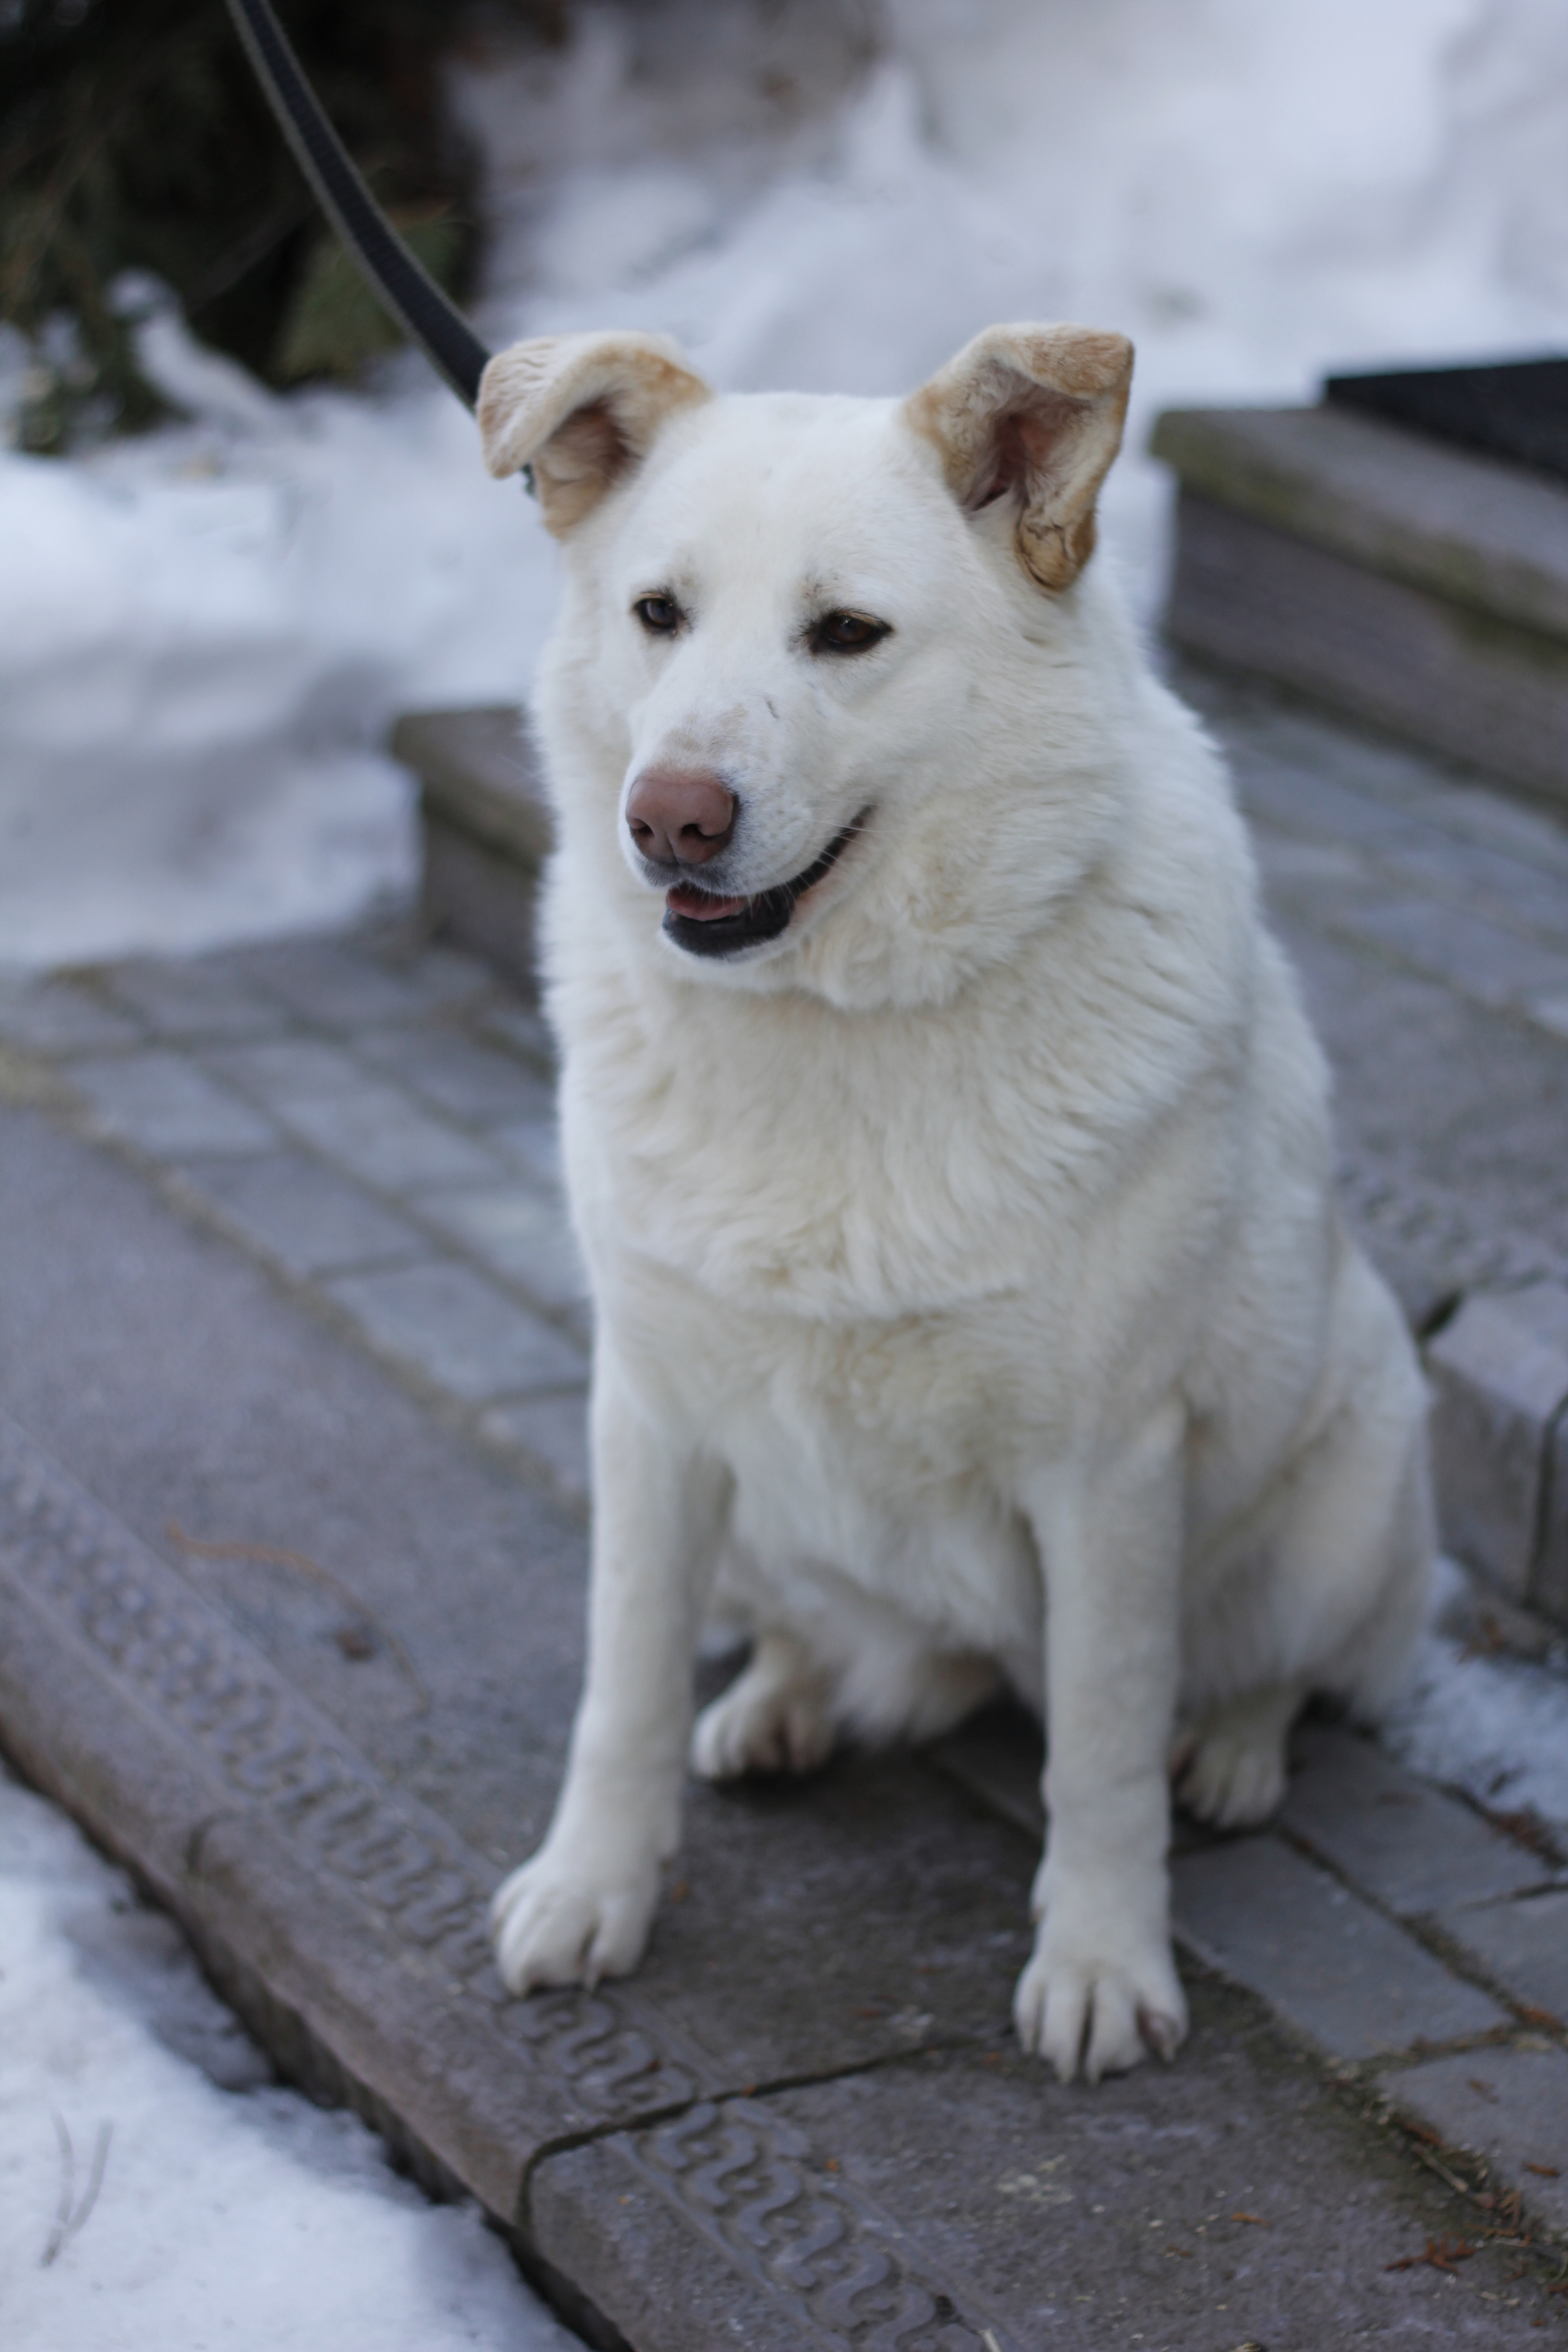 Gretta is looking for a house Moscow, Podolsk and Moscow region - My, Homeless animals, Dog, In good hands, Volunteering, Animal shelter, Shelter, Help, Longpost, No rating